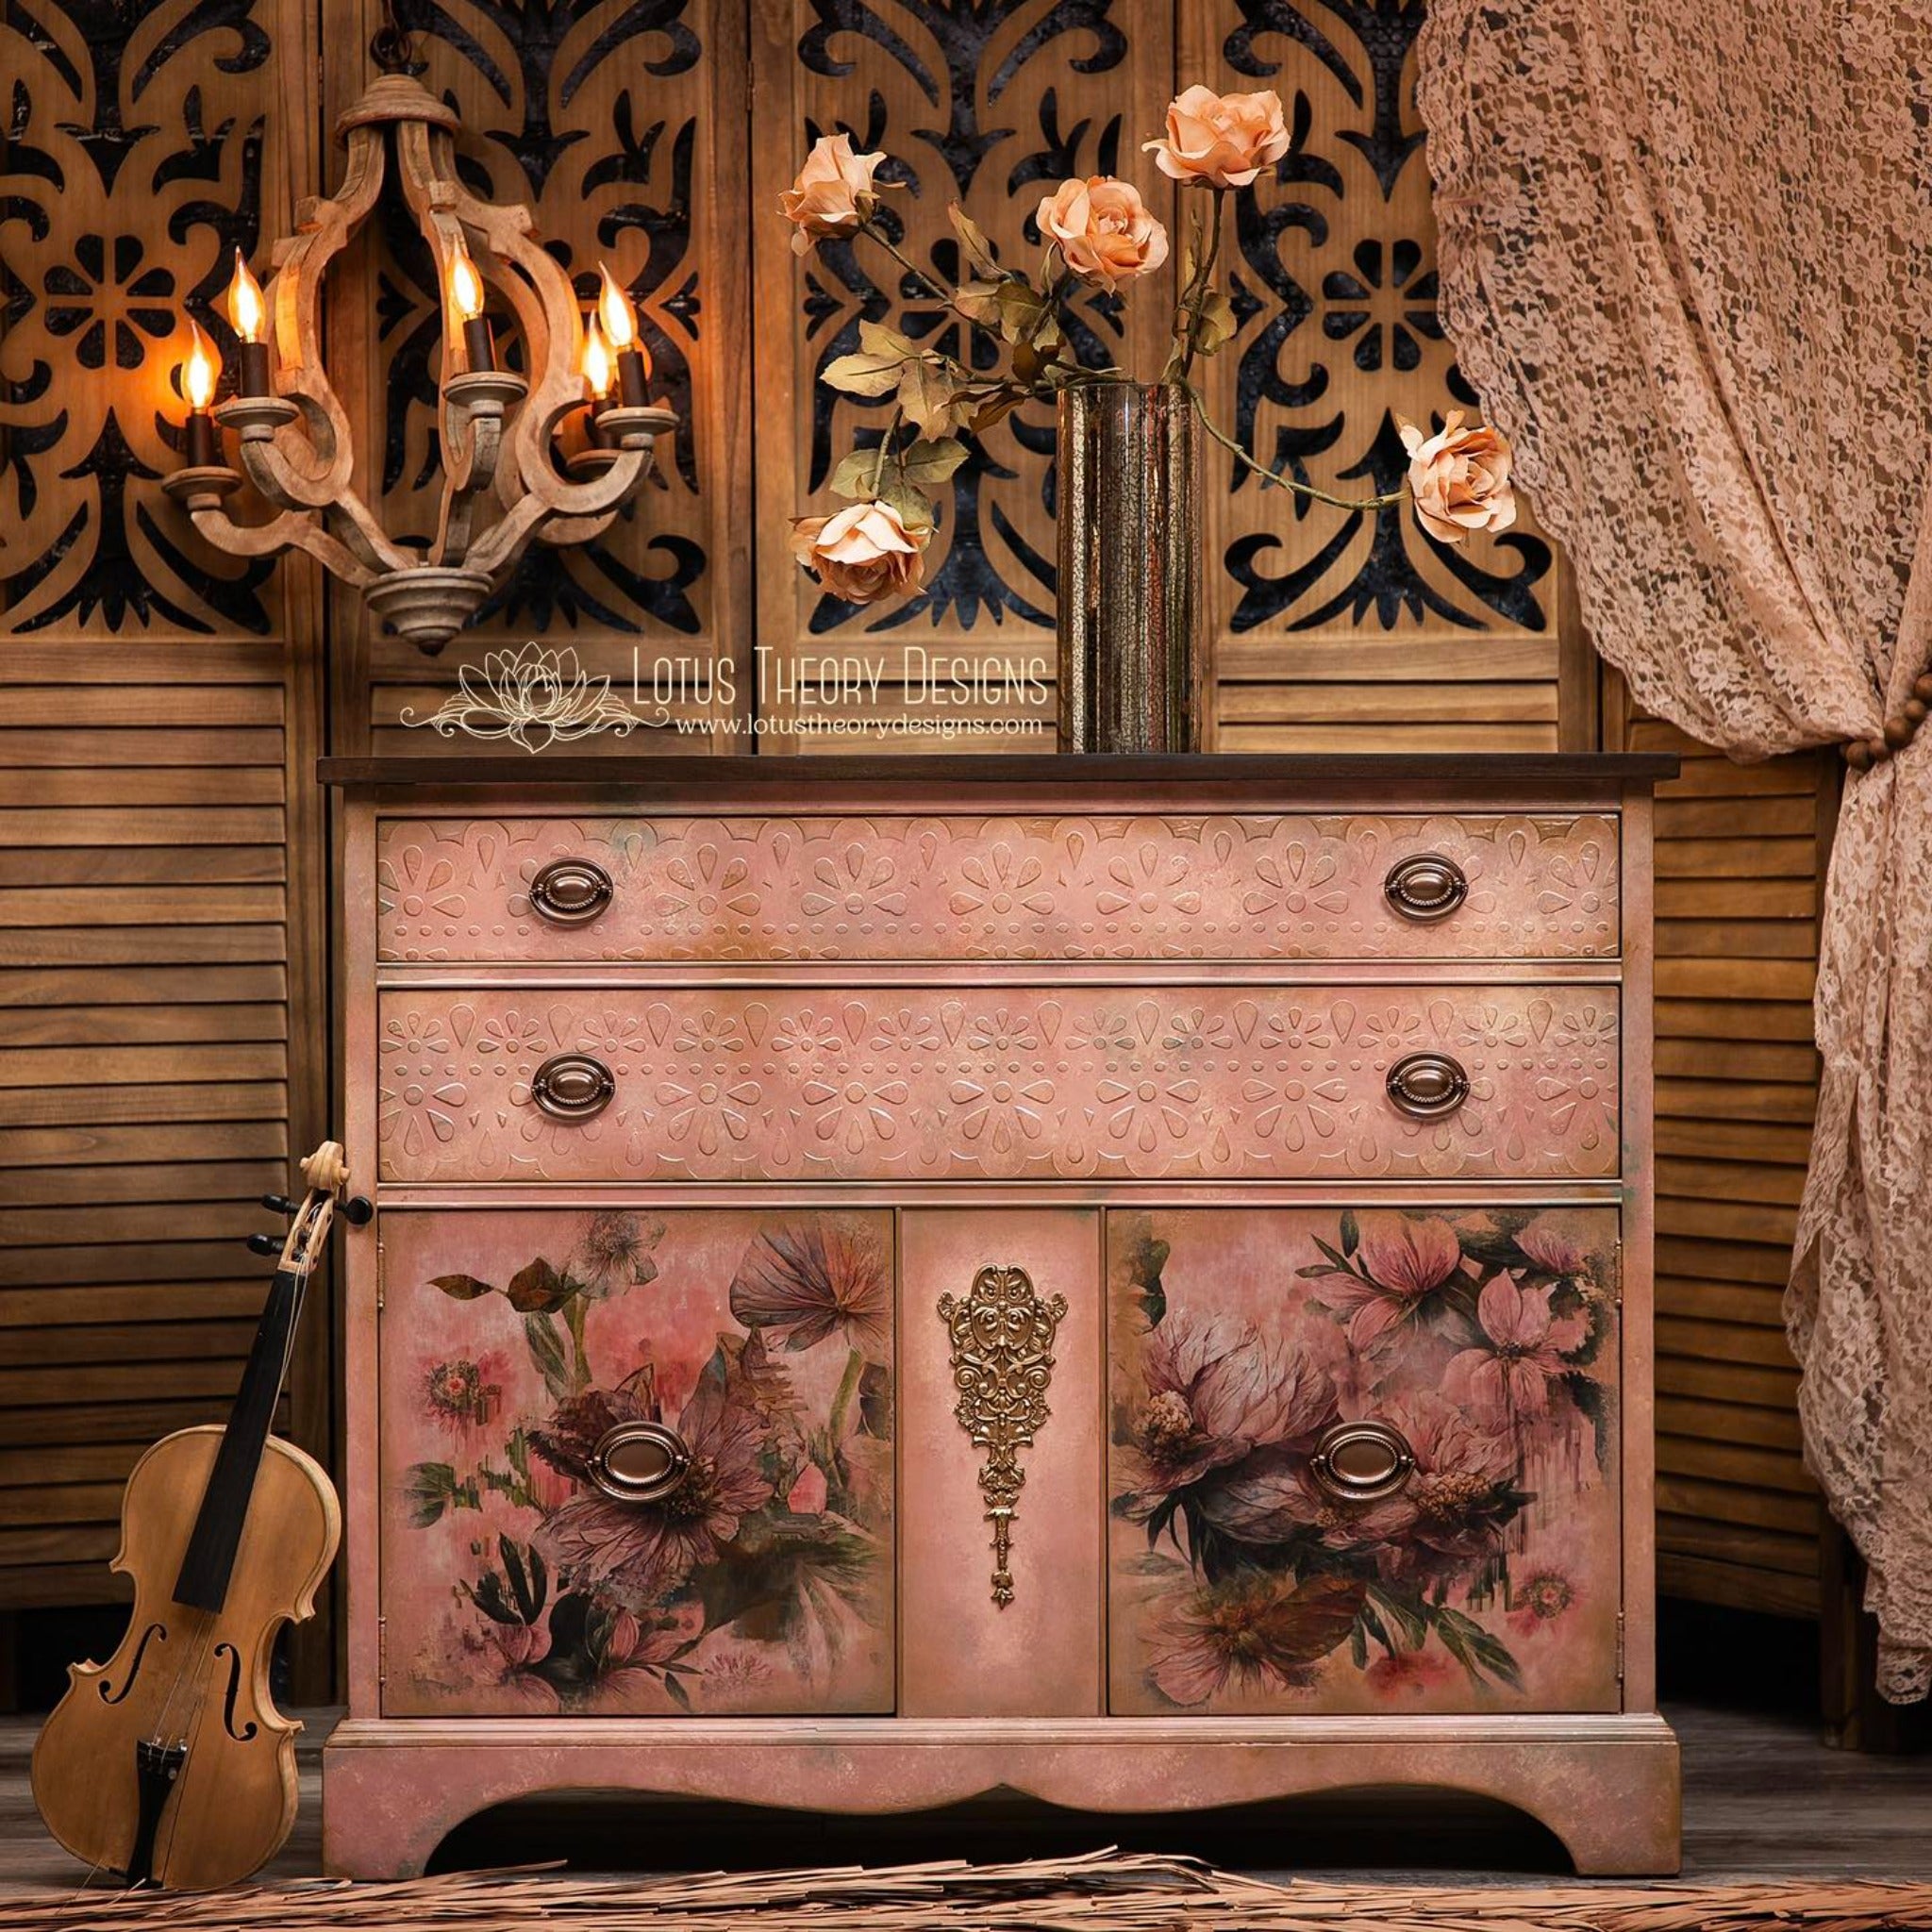 A dresser refurbished by Lotus Theory Designs is painted mauve pink and features ReDesign with Prima's Golden Emblem silicone mould on a panel that is between its 2 bottom doors that are under 2 long top drawers.